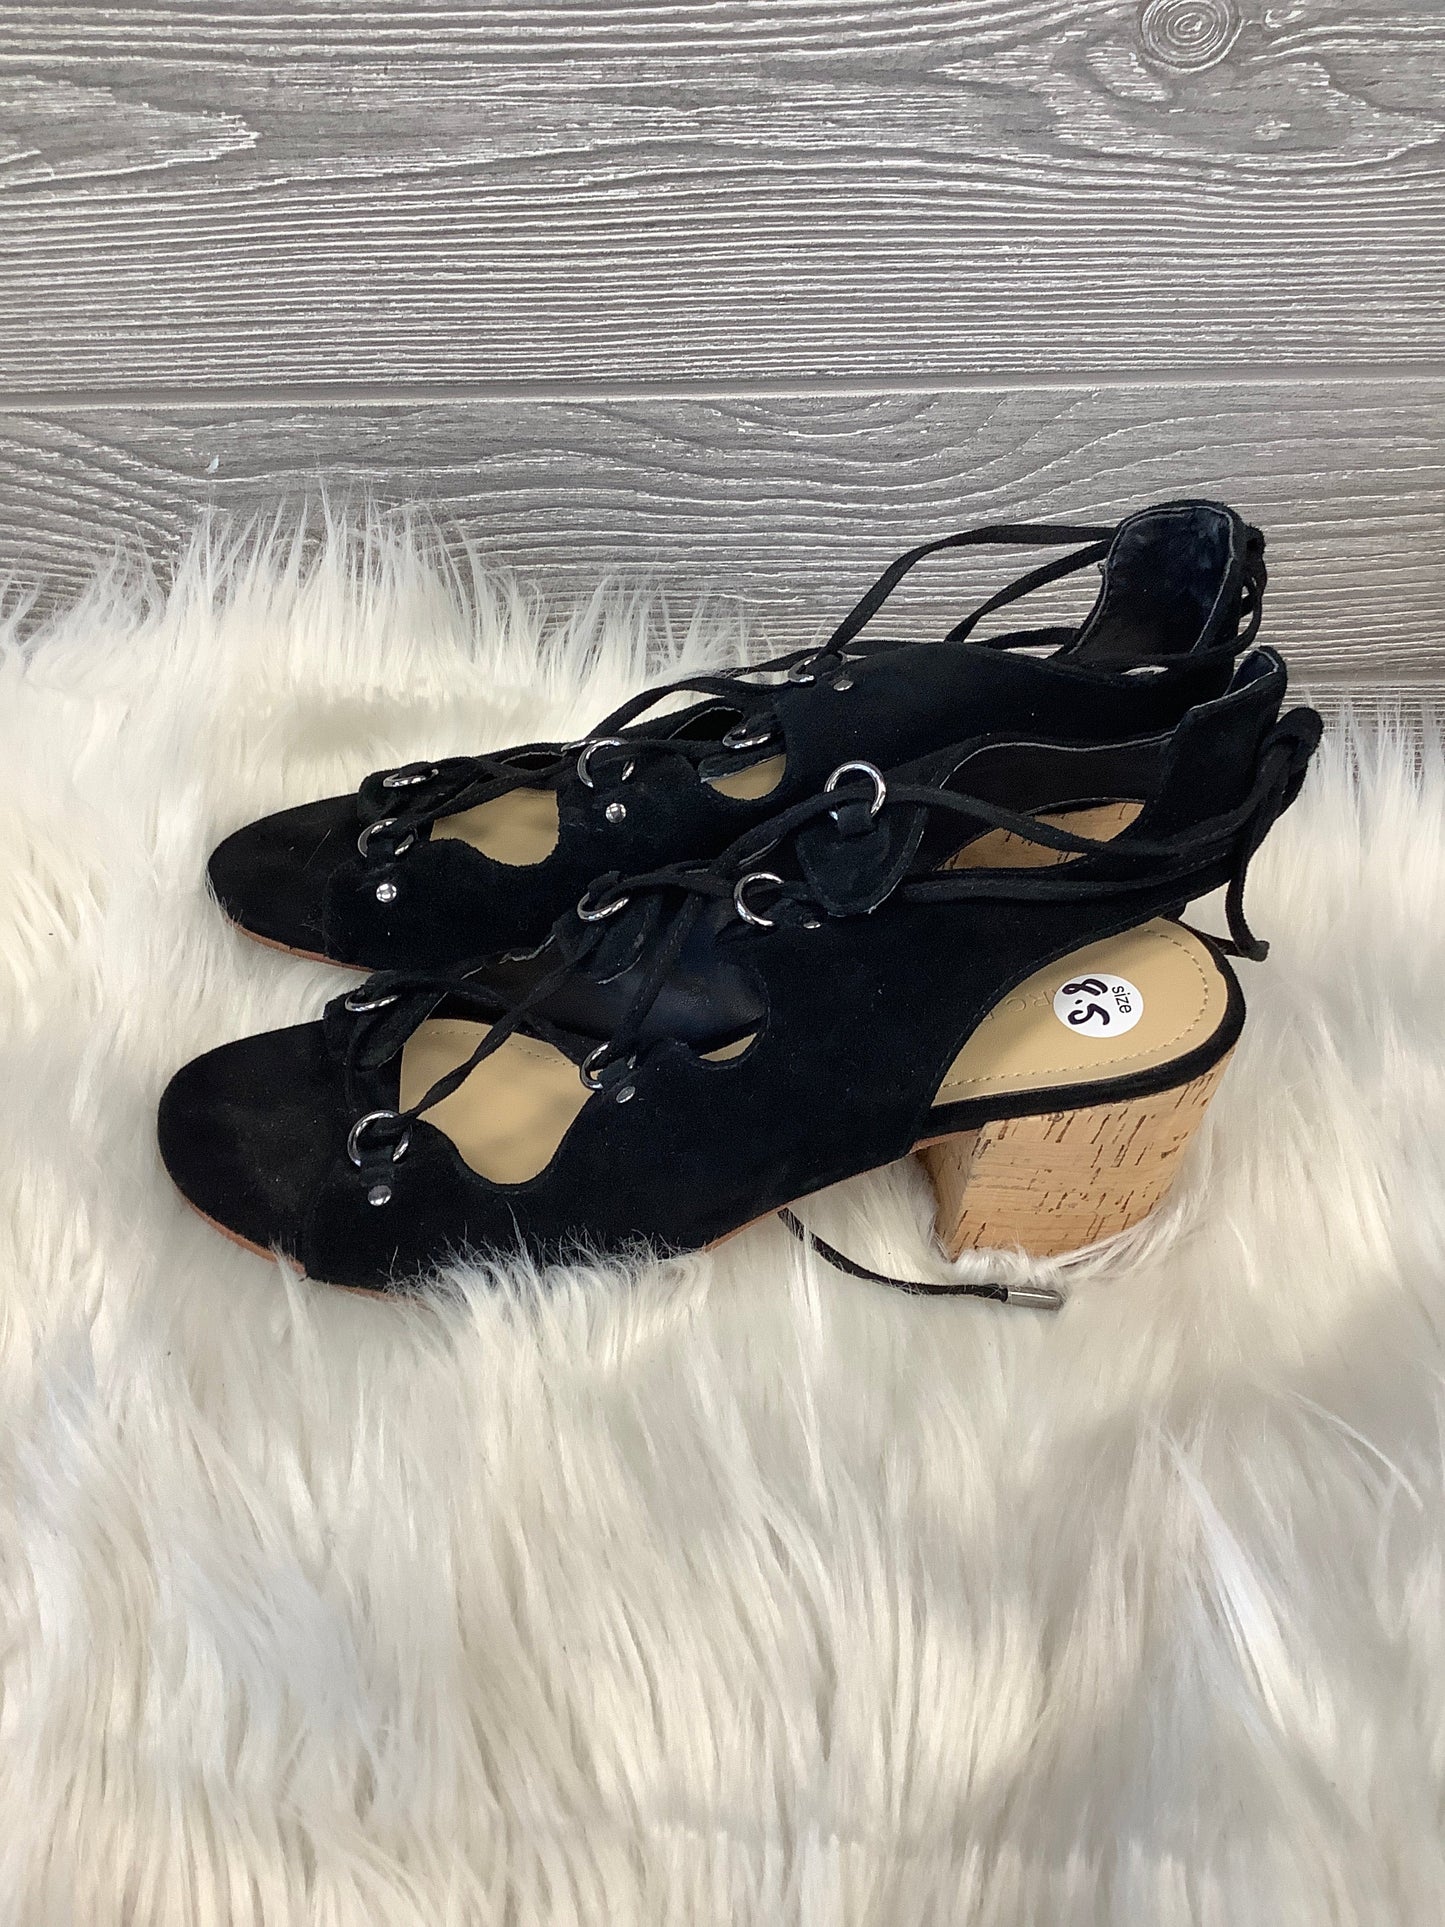 Sandals Heels Block By Marc Fisher  Size: 8.5